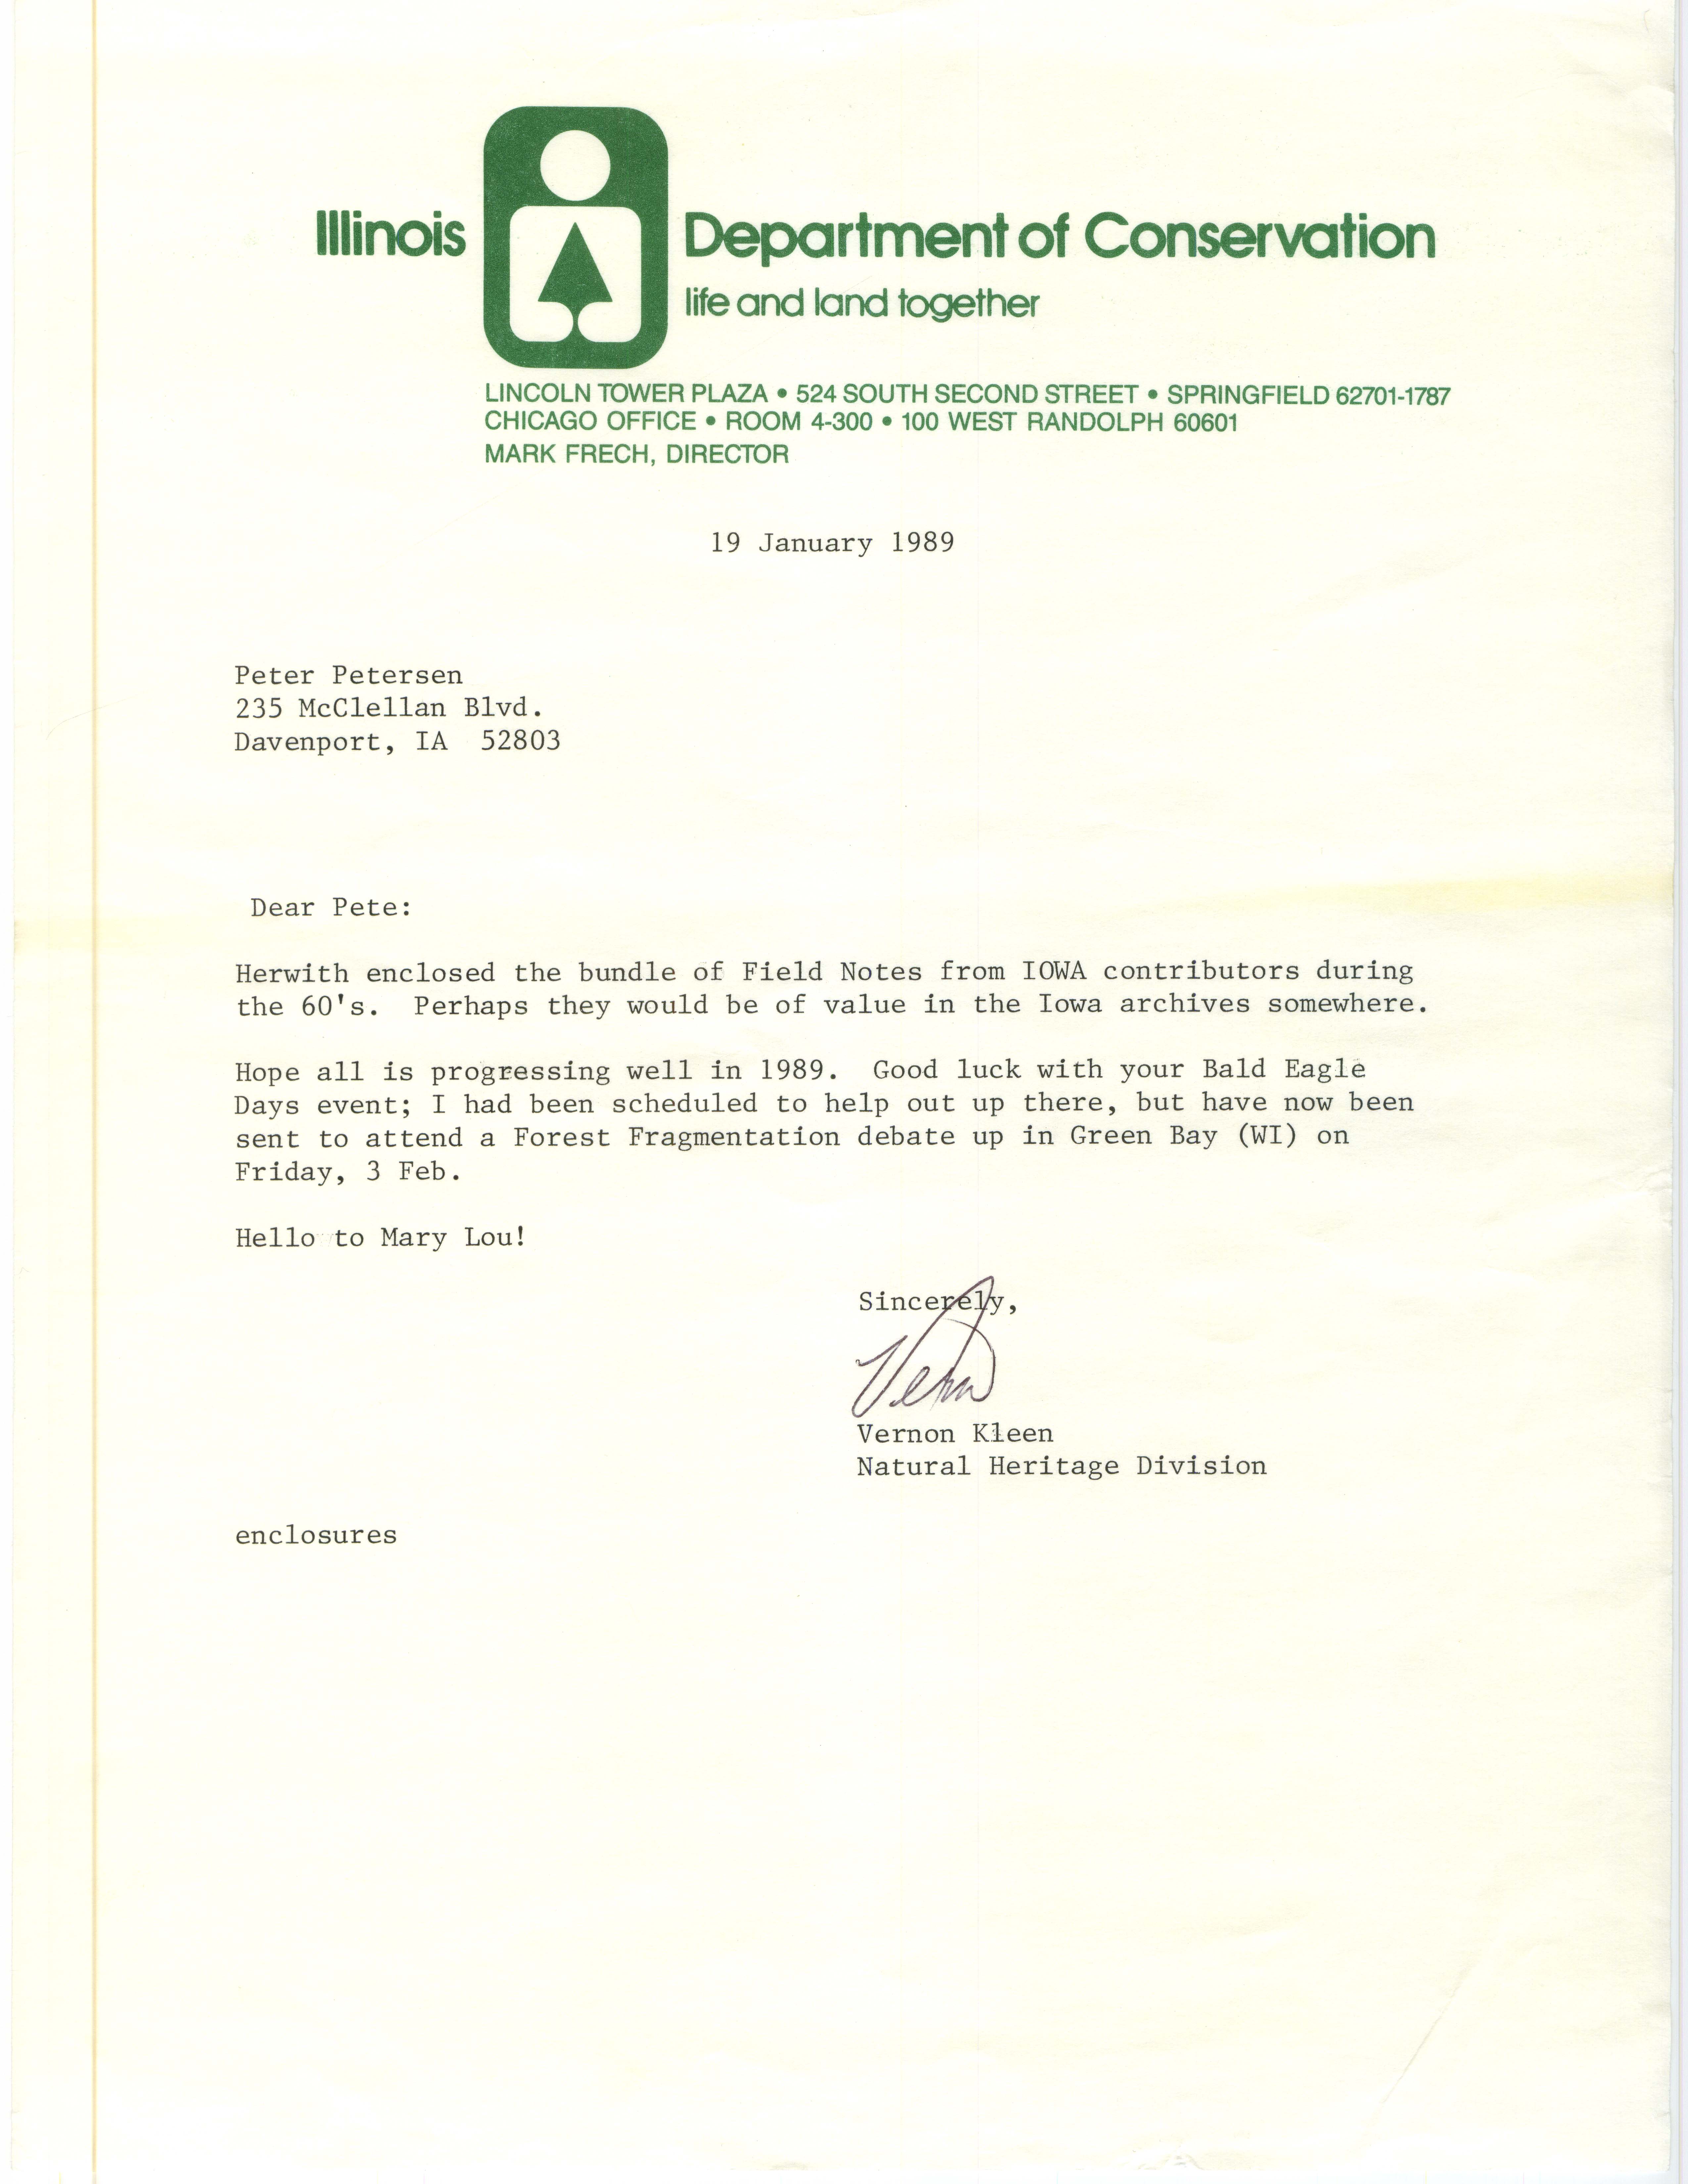 Vernon M. Kleen letter to Peter C. Petersen regarding field notes from the 1960s, January 19, 1989